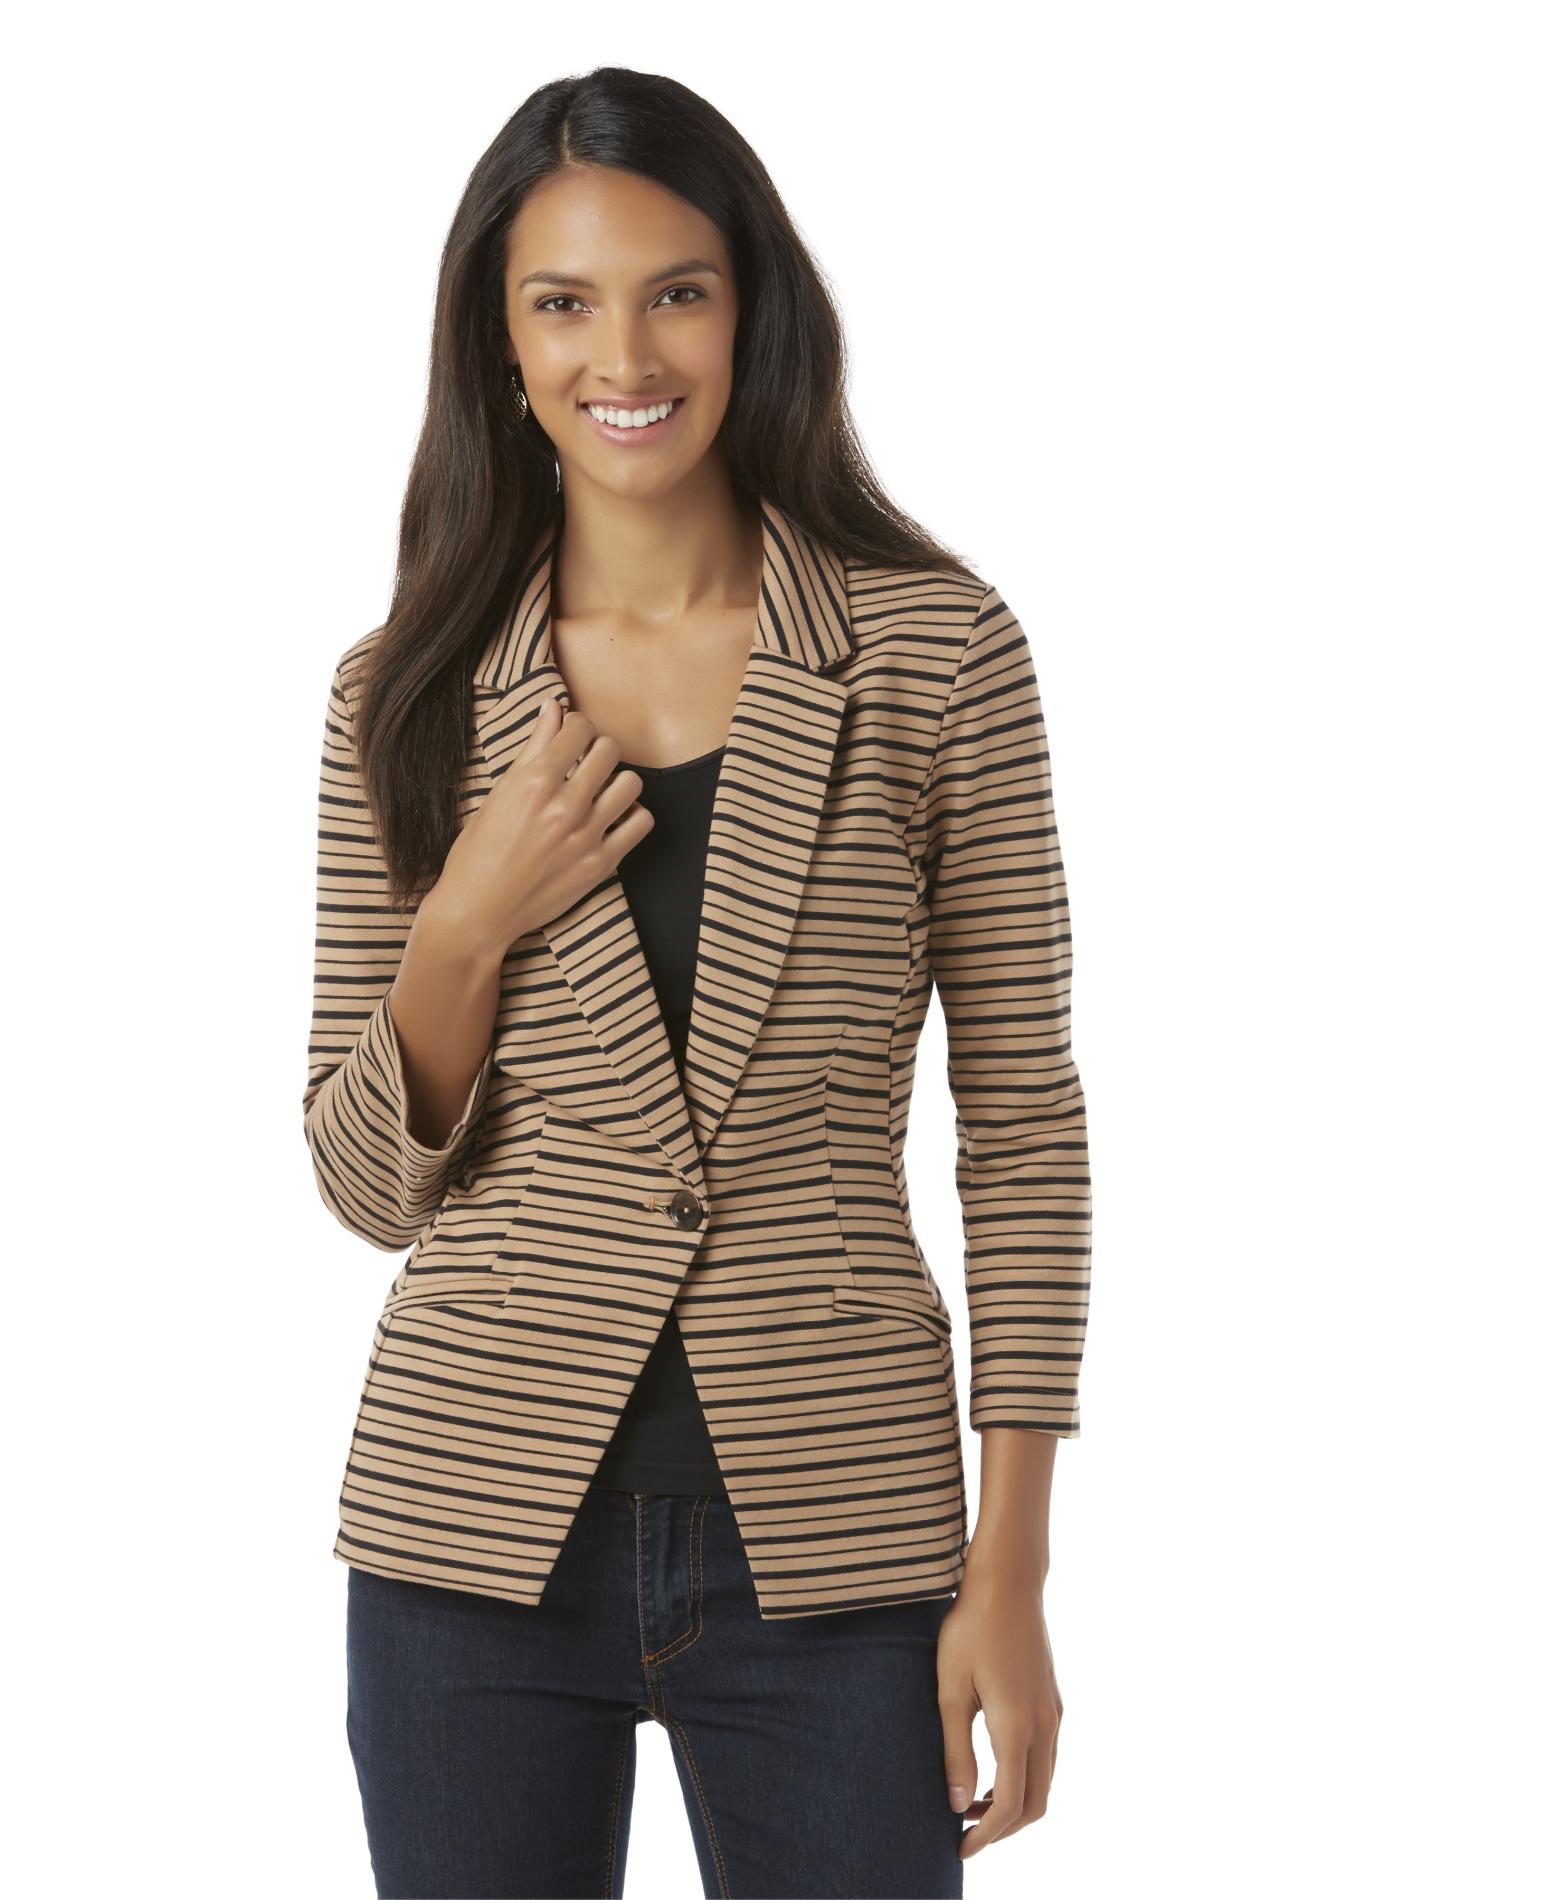 Metaphor Women's French Terry Knit Jacket - Striped